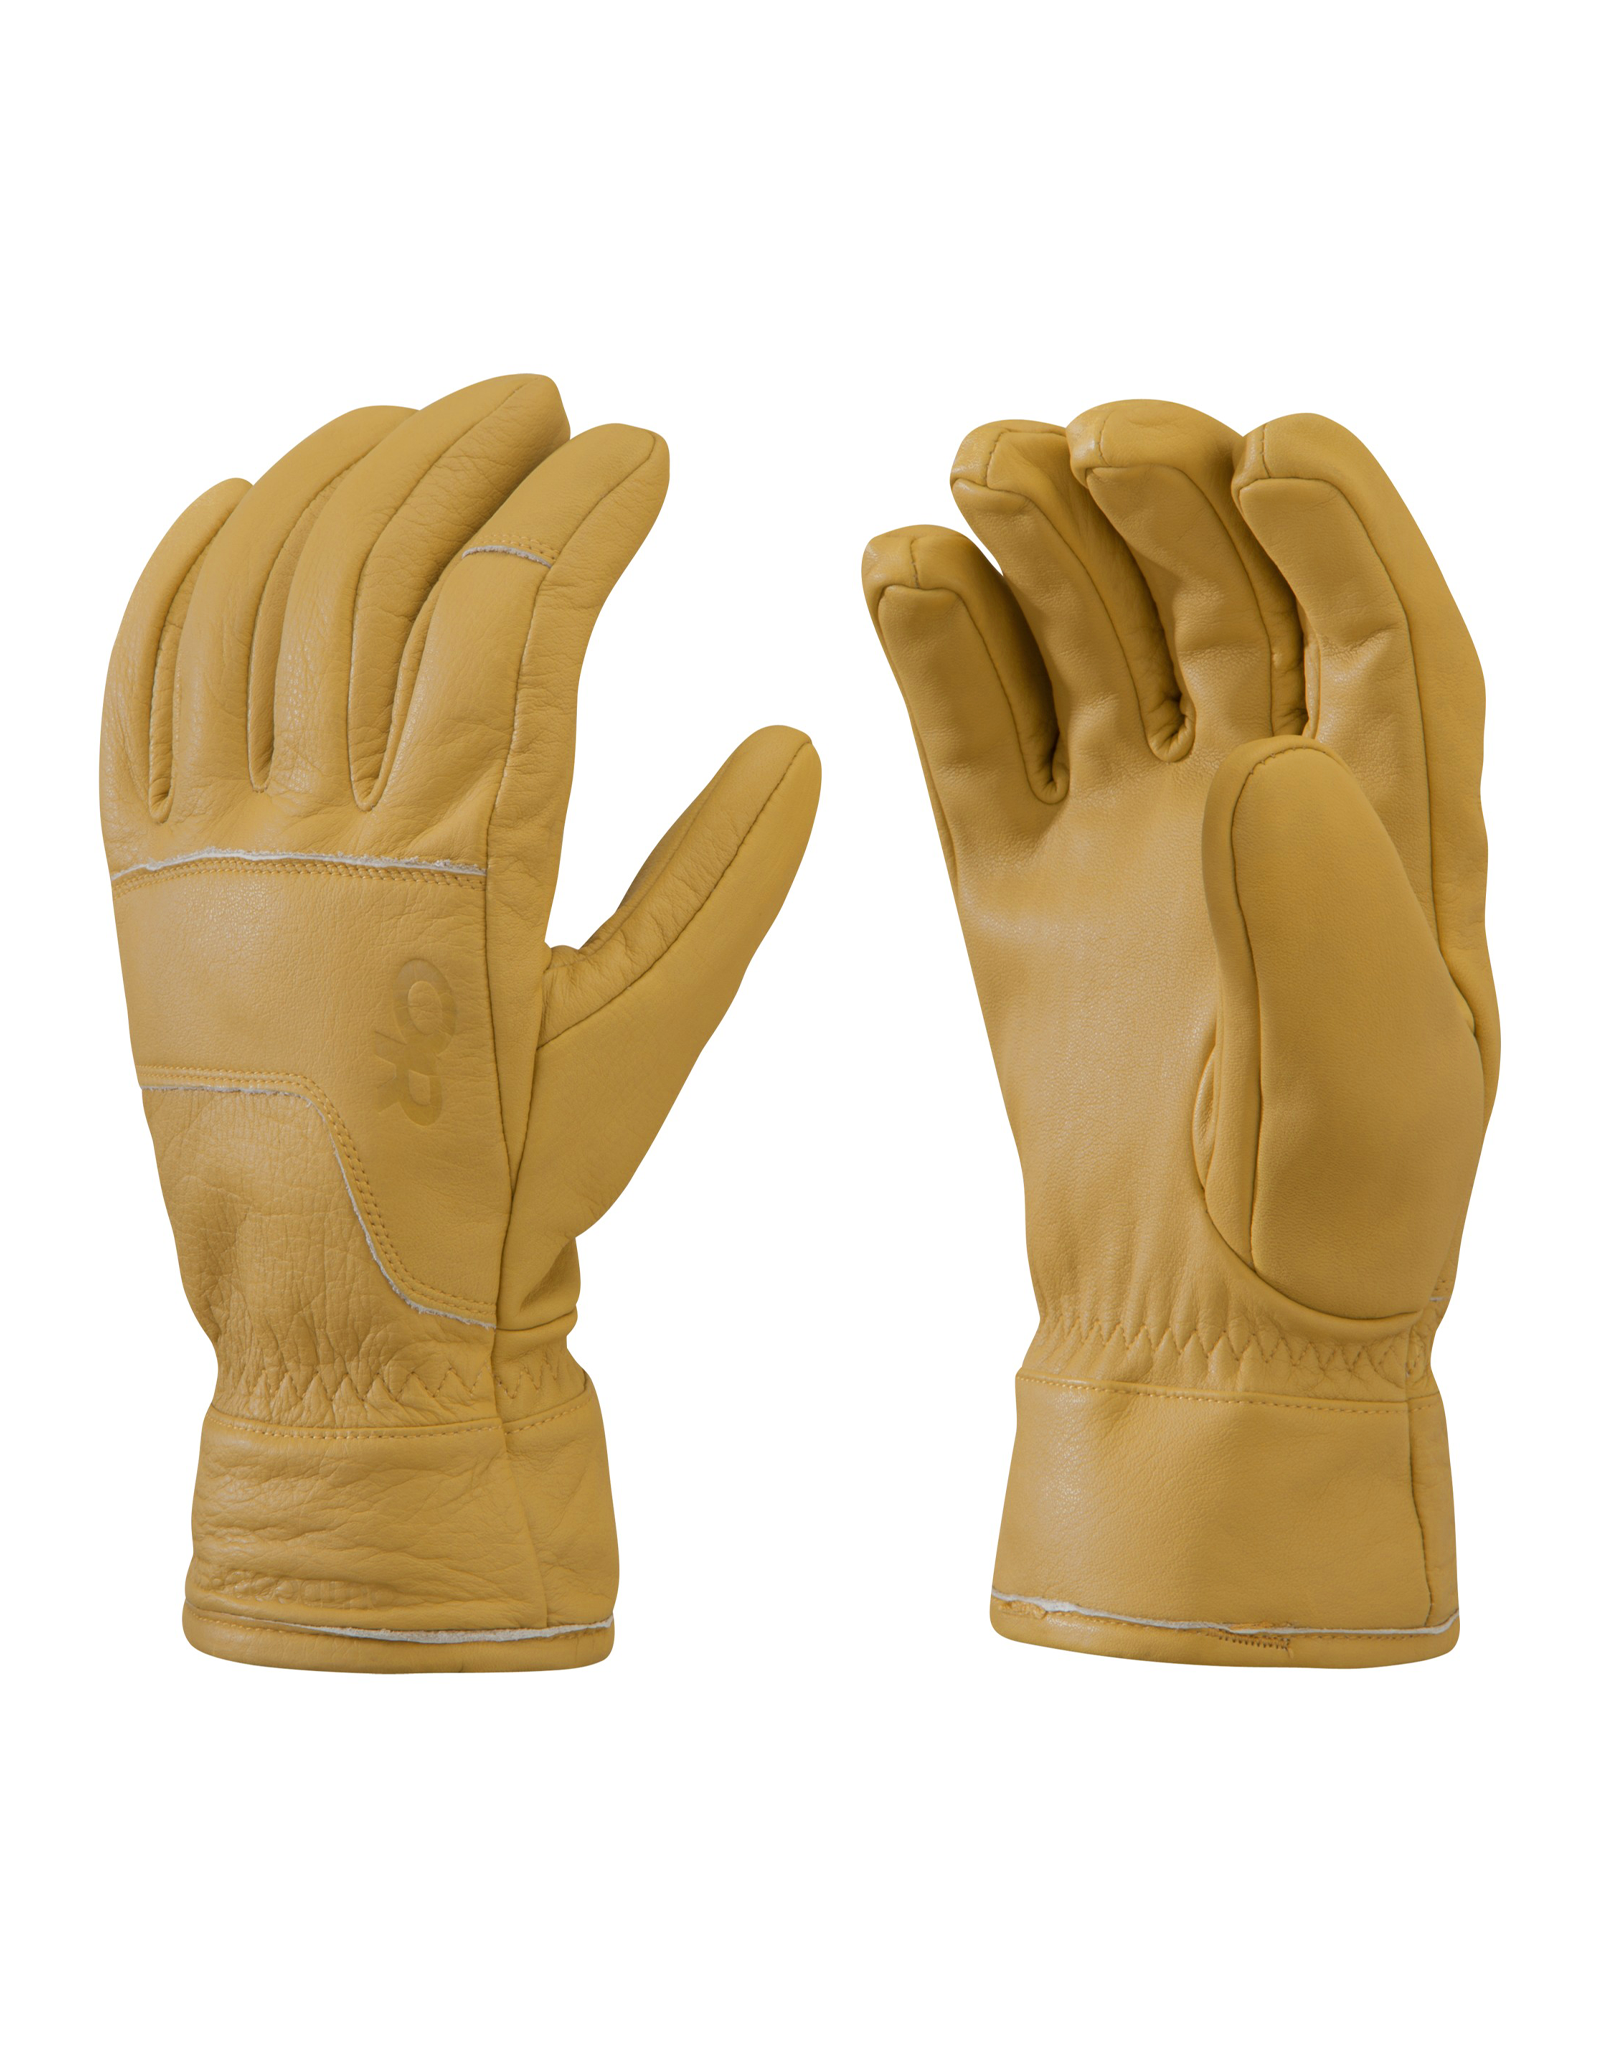 Outdoor Research Outdoor Research Aksel Work Glove Men's